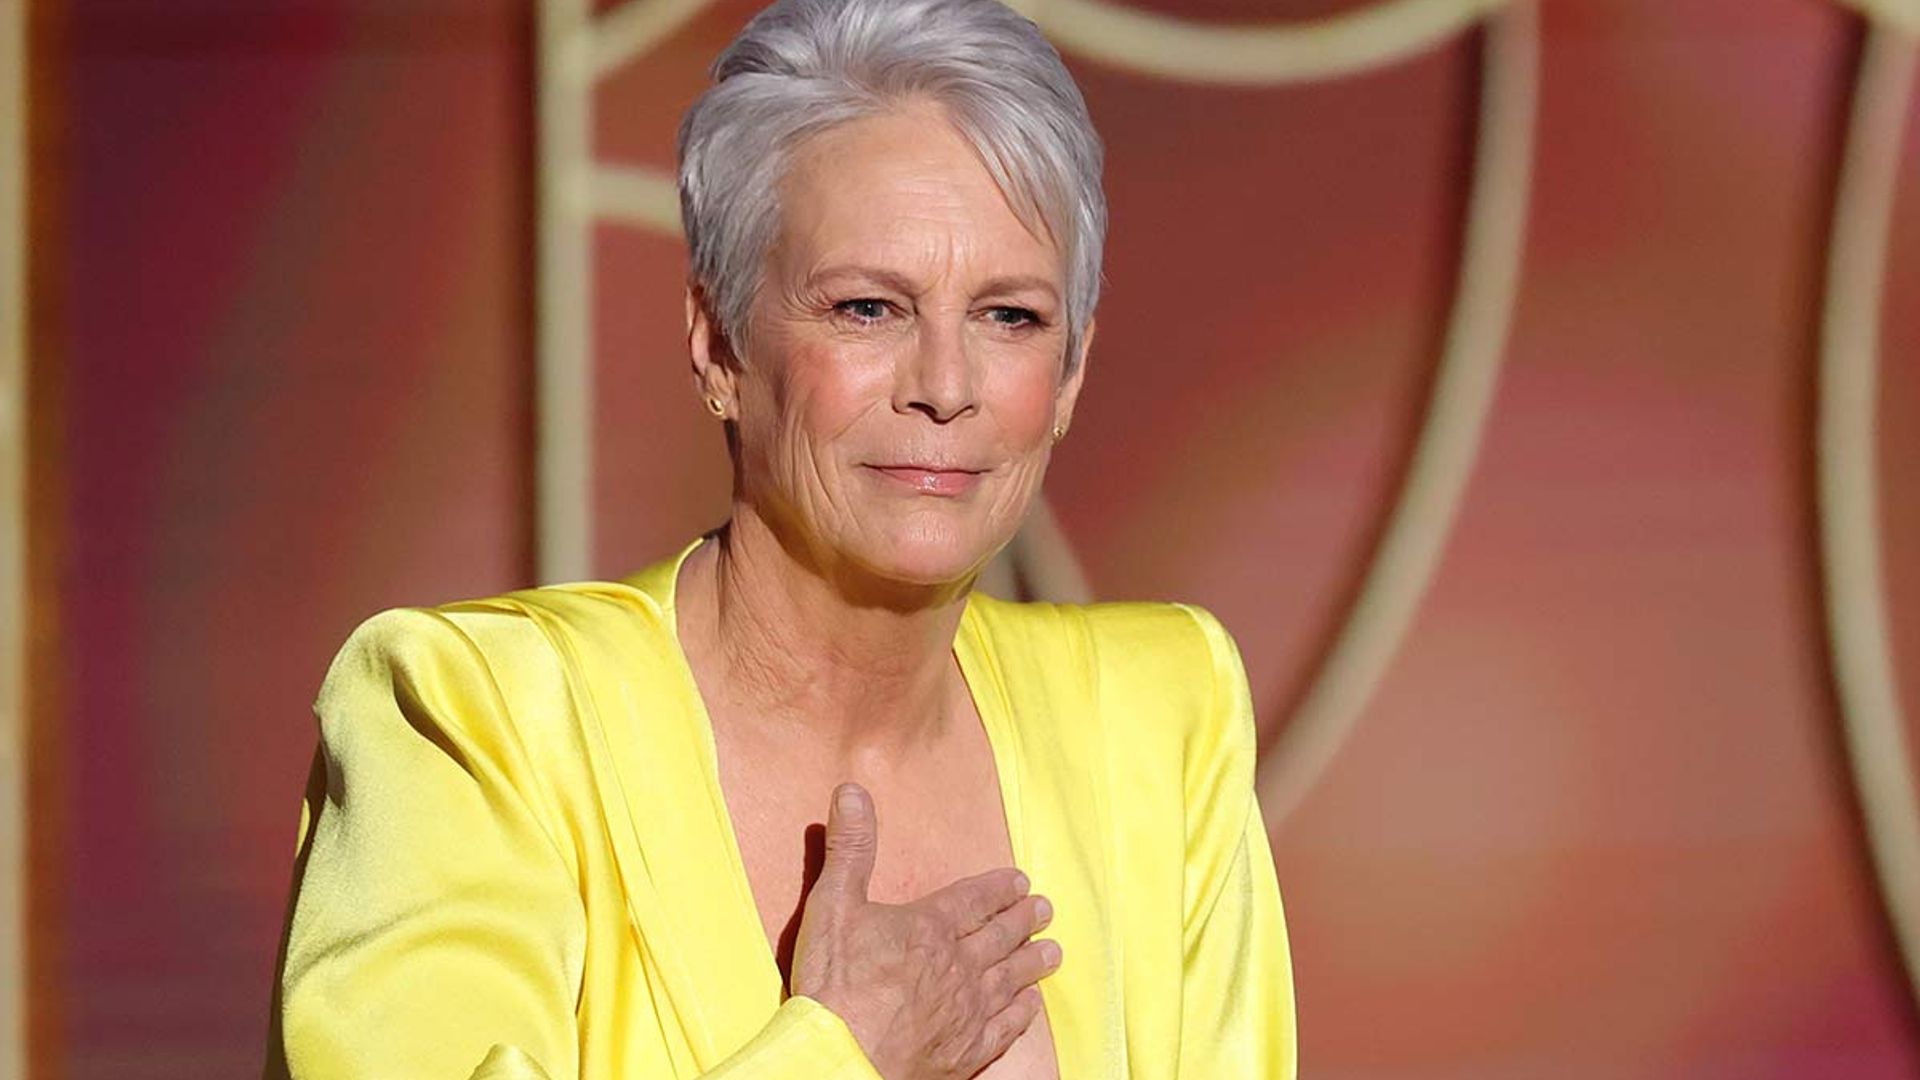 Jamie Lee Curtis' heartbreaking personal struggle with addiction in her own words